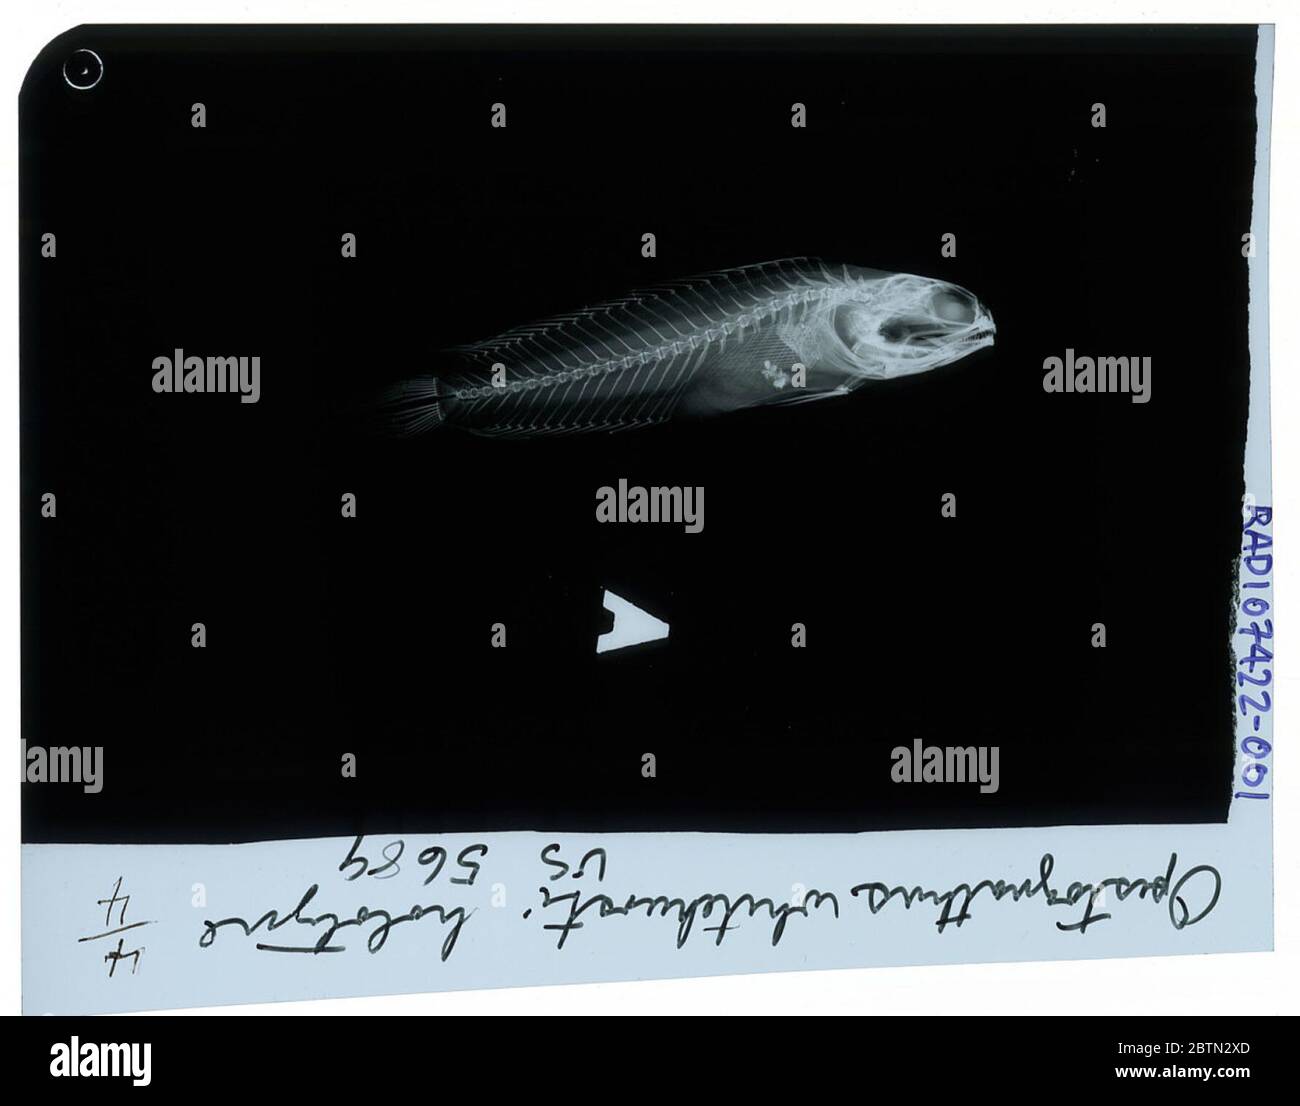 Opisthognathus whitehursti. Radiograph is of a holotype; The Smithsonian NMNH Division of Fishes uses the convention of maintaining the original species name for type specimens designated at the time of description. The currently accepted name for this species is Opistognathus whitehursti.6 Nov 20182 Stock Photo